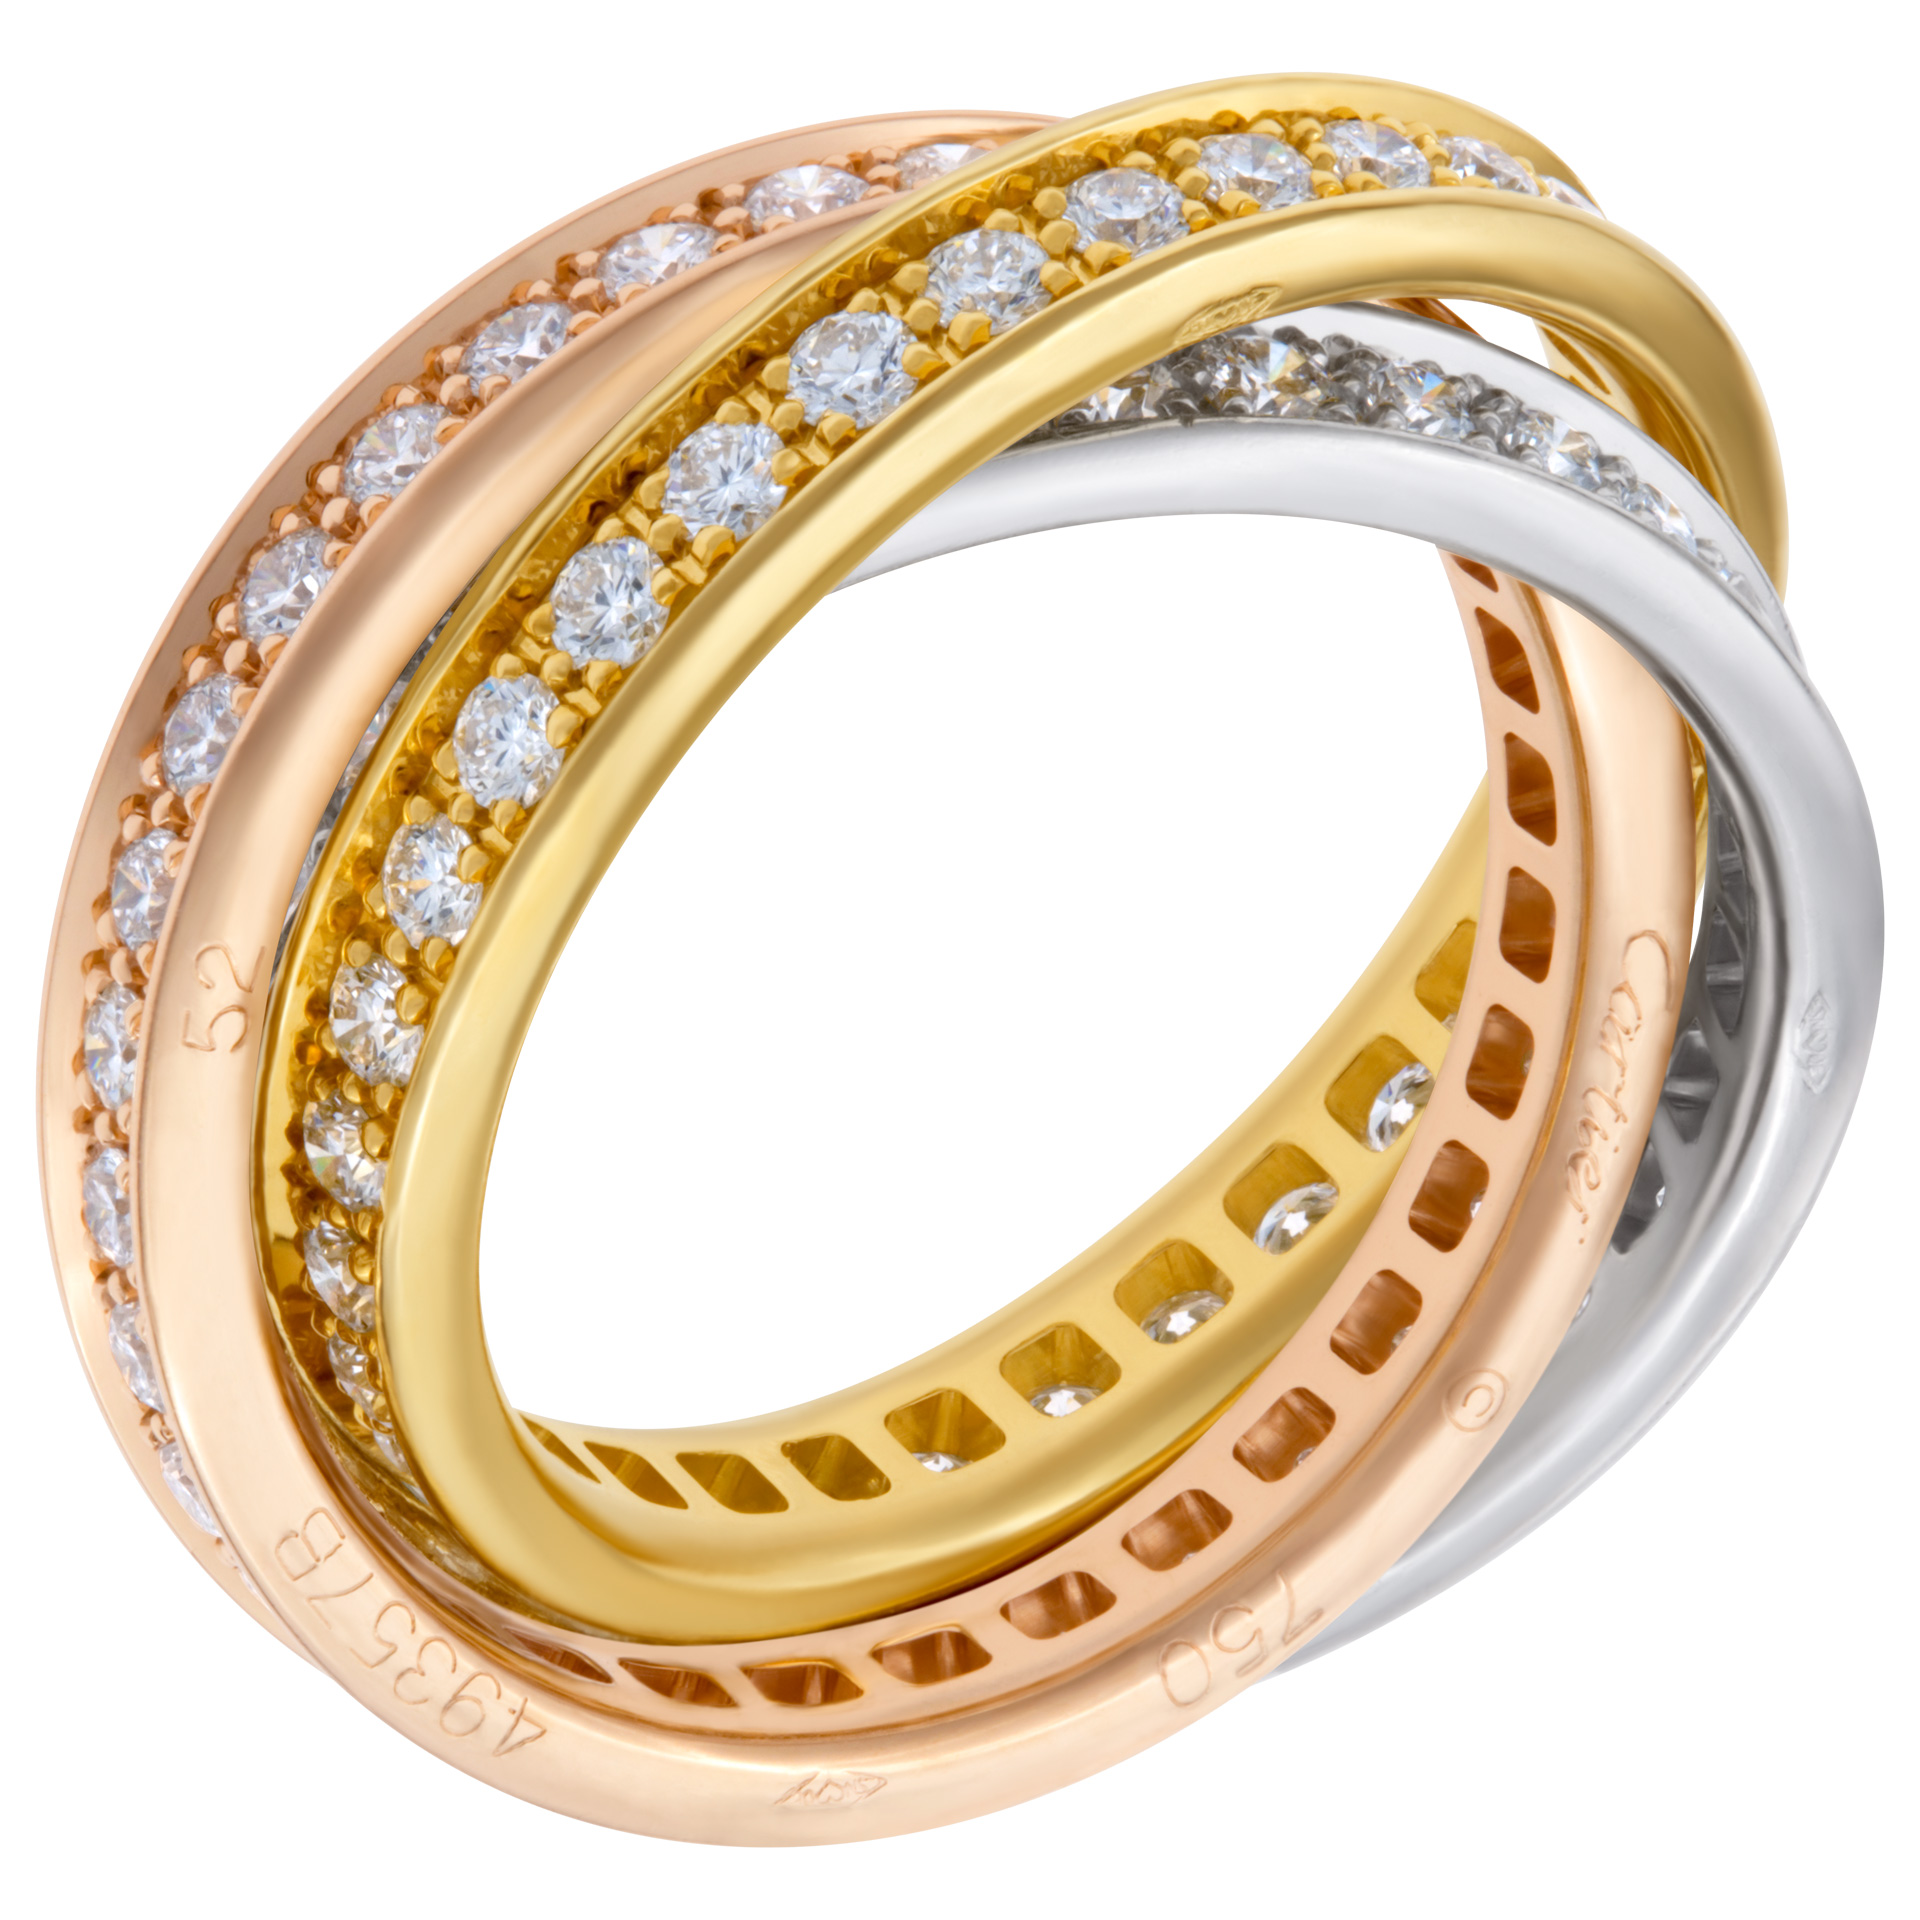 Cartier Trinity Rolling Ring With Diamond image 1